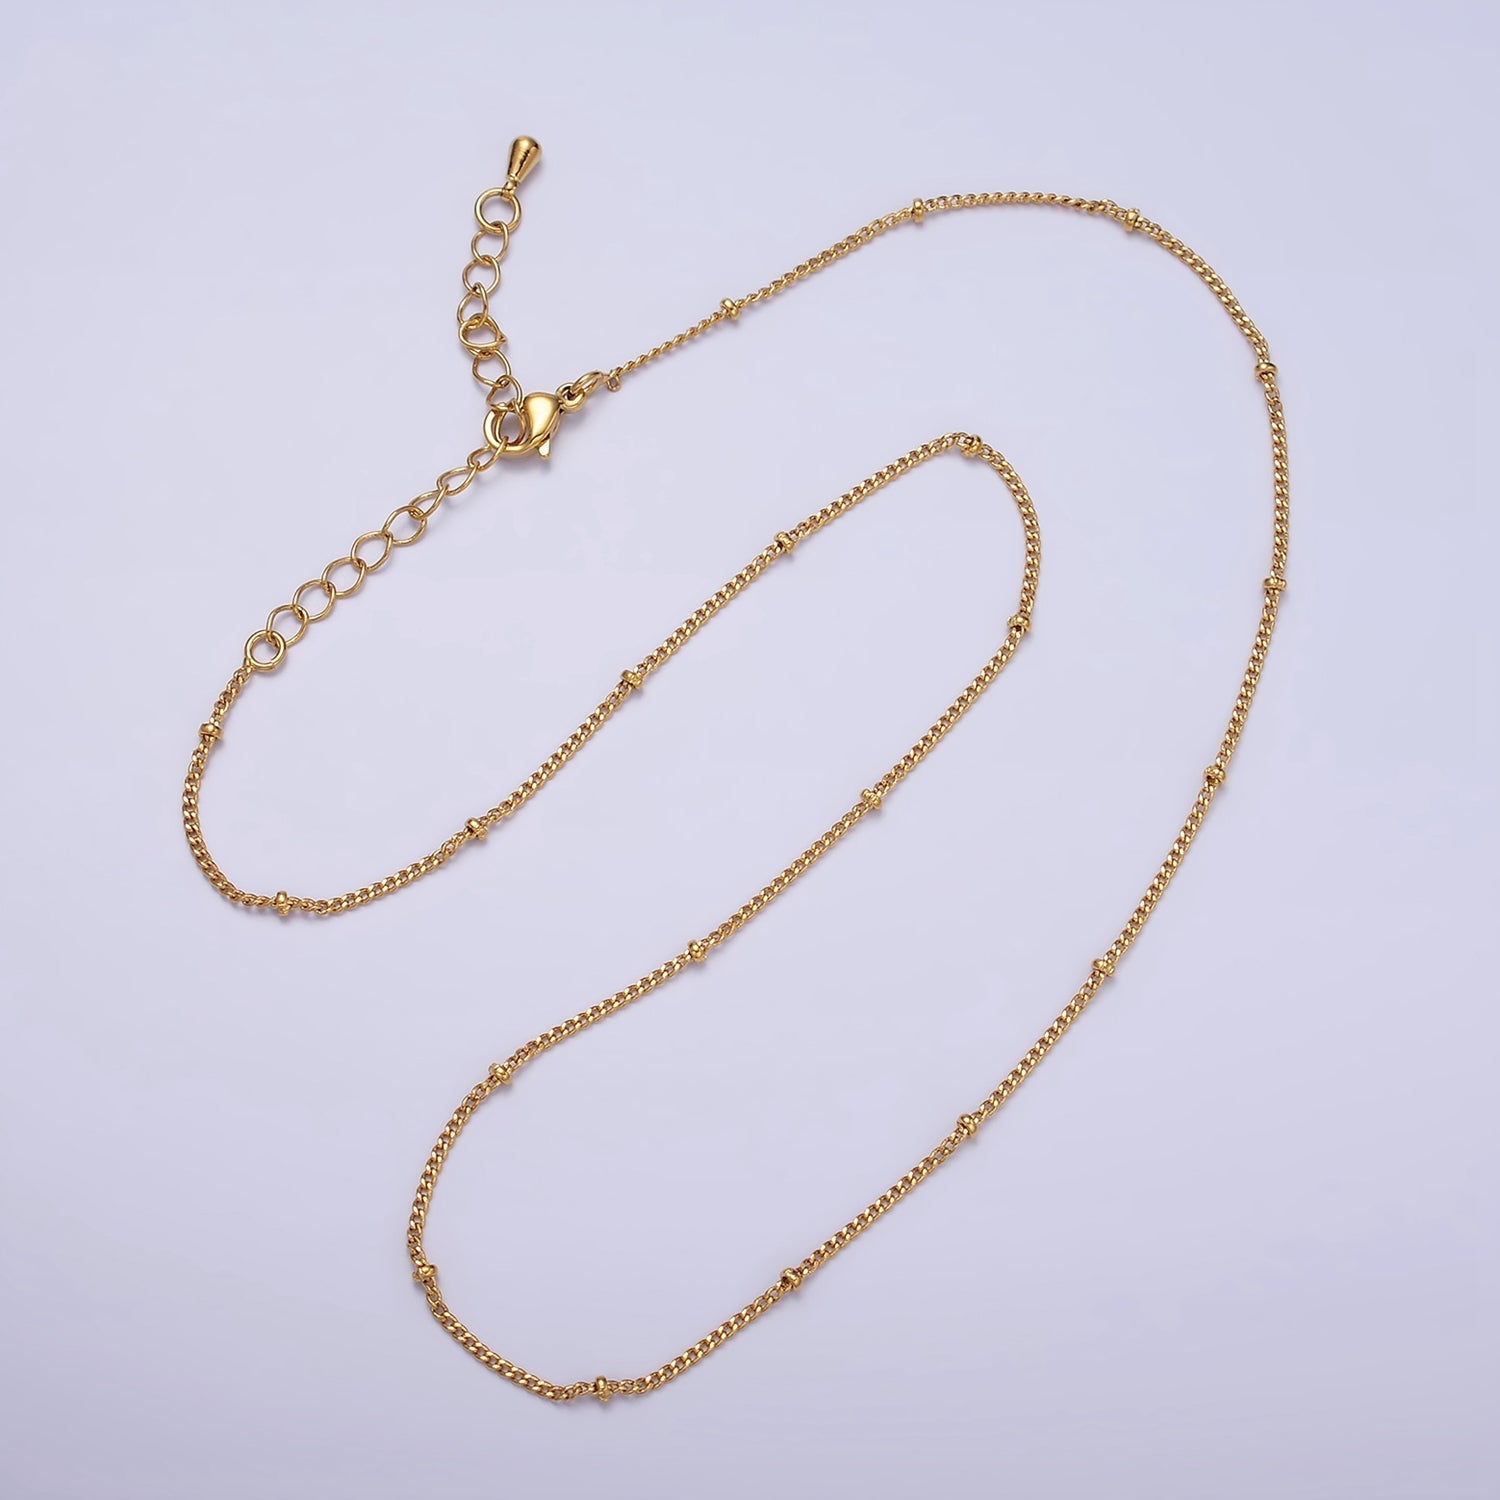 24K Gold Filled Curb Chain With Gold Beads For Wholesale Necklace Dainty Satellite Chain Jewelry Making Supplies | WA1845 WA1846